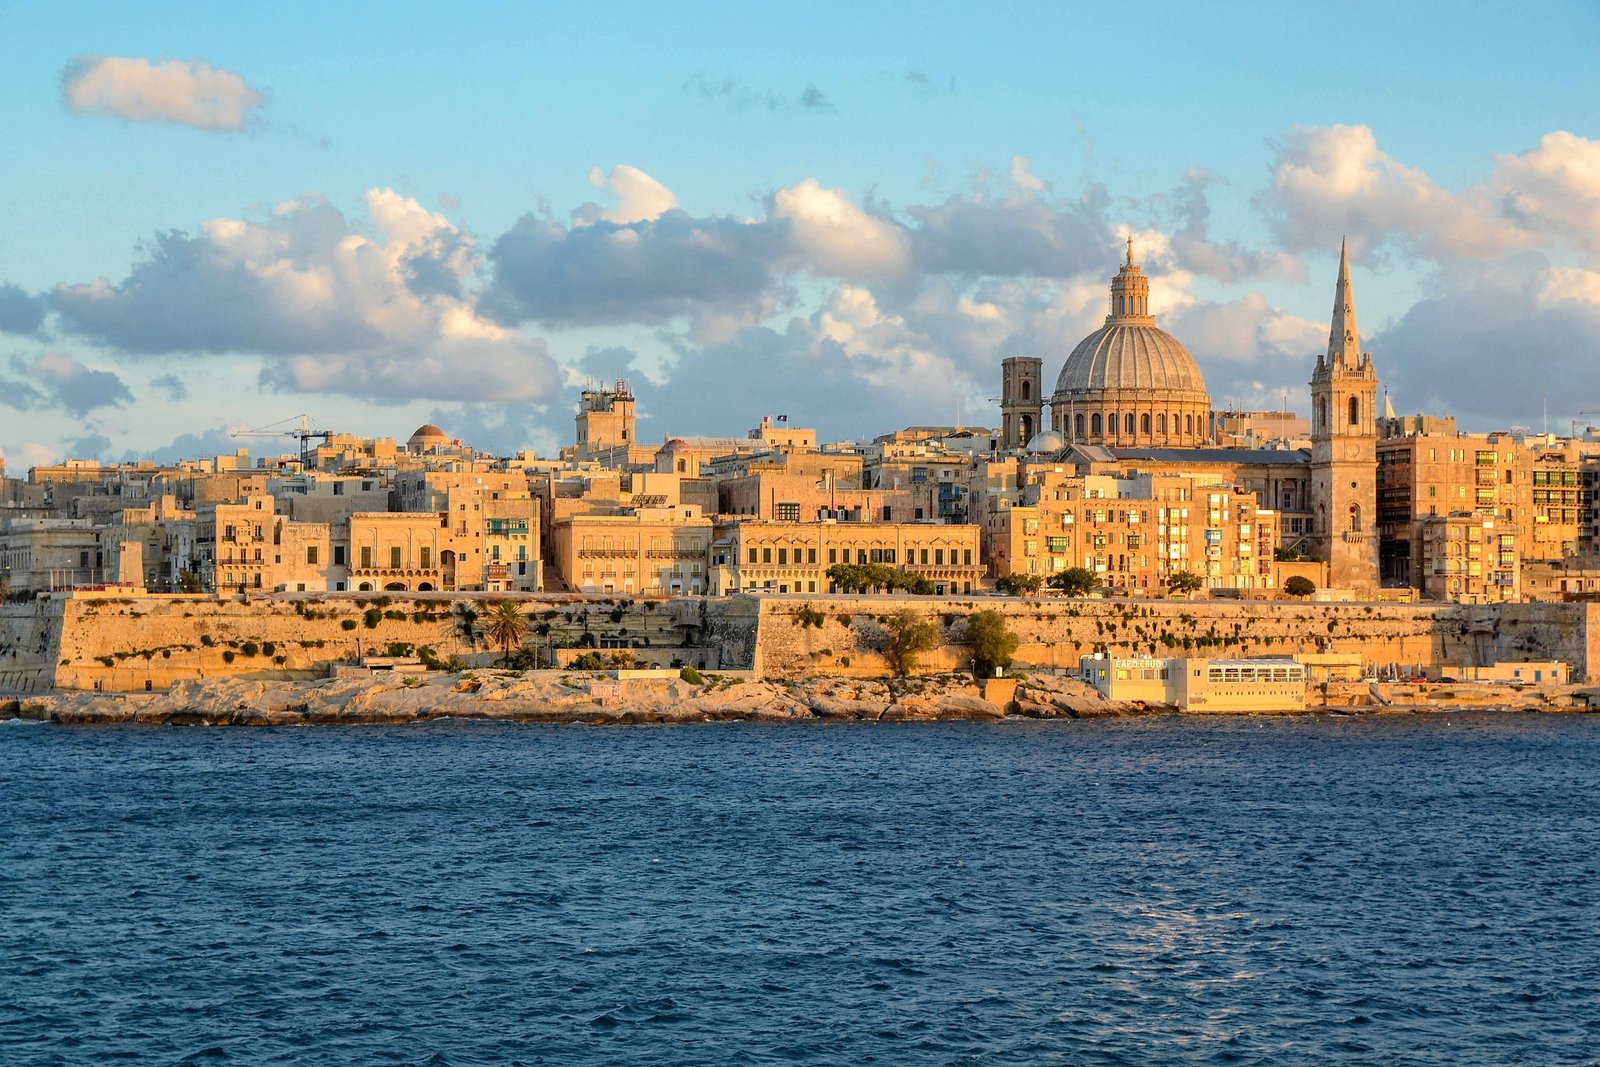 Built heritage conference goes behind the scenes in historic Malta - MCCM